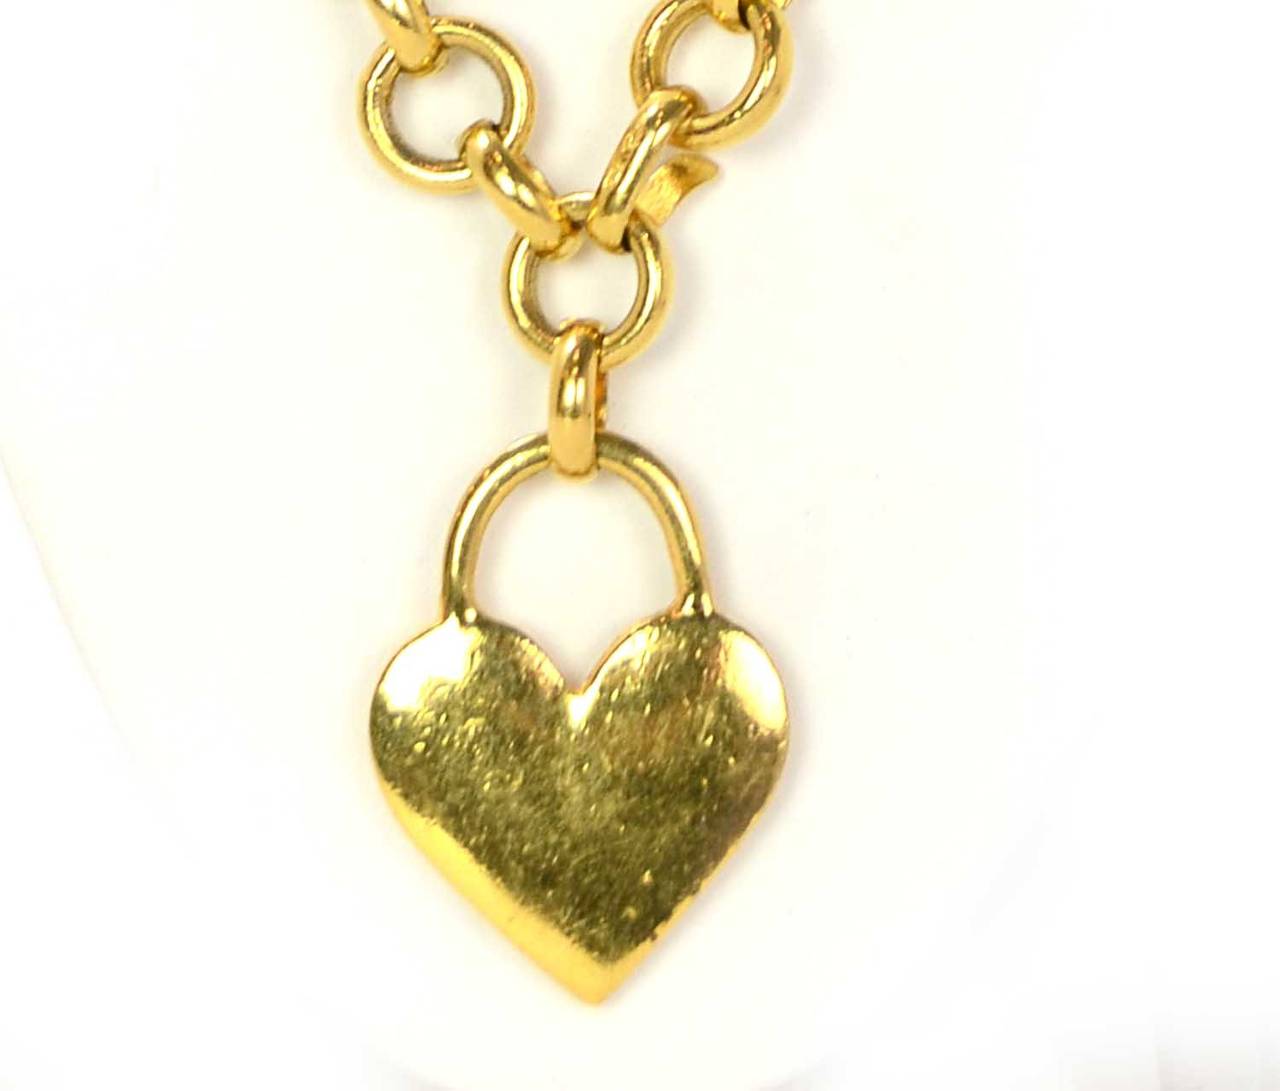 CHANEL Gold Chain & Heart Necklace w/Red StoneFeatures red stone at the center of gold heart pendant

    Made in: Not given- believed to be France
    Stamp: CHANEL
    Closure: Jump ring closure
    Color: Gold and red
    Materials: Metal